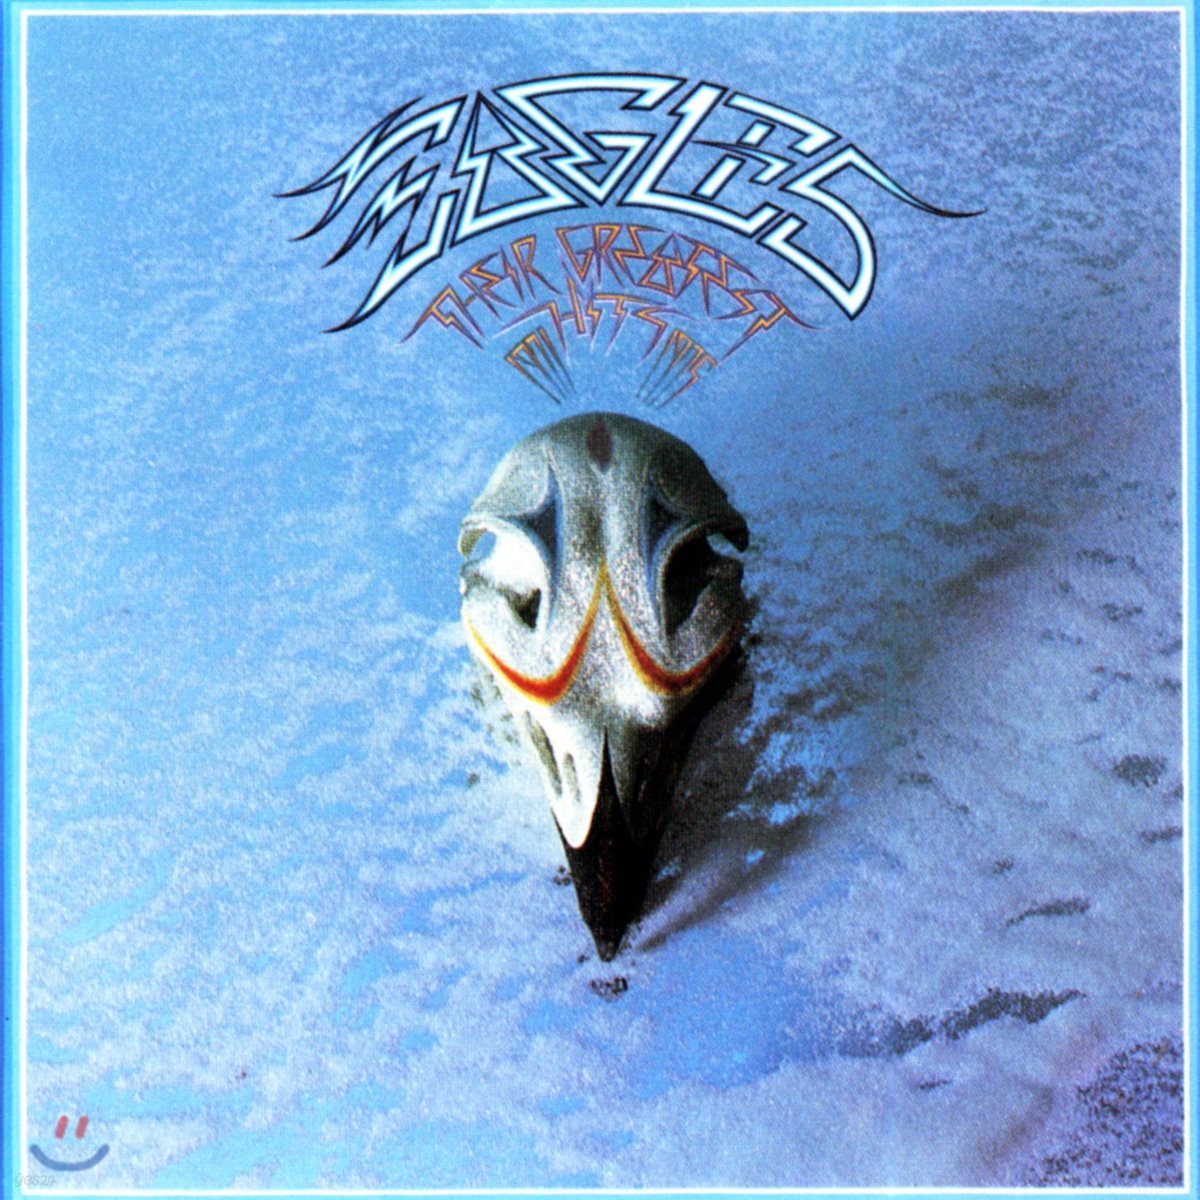 Eagles - Their Greatest Hits Volumes 1 & 2 이글스 베스트 앨범 